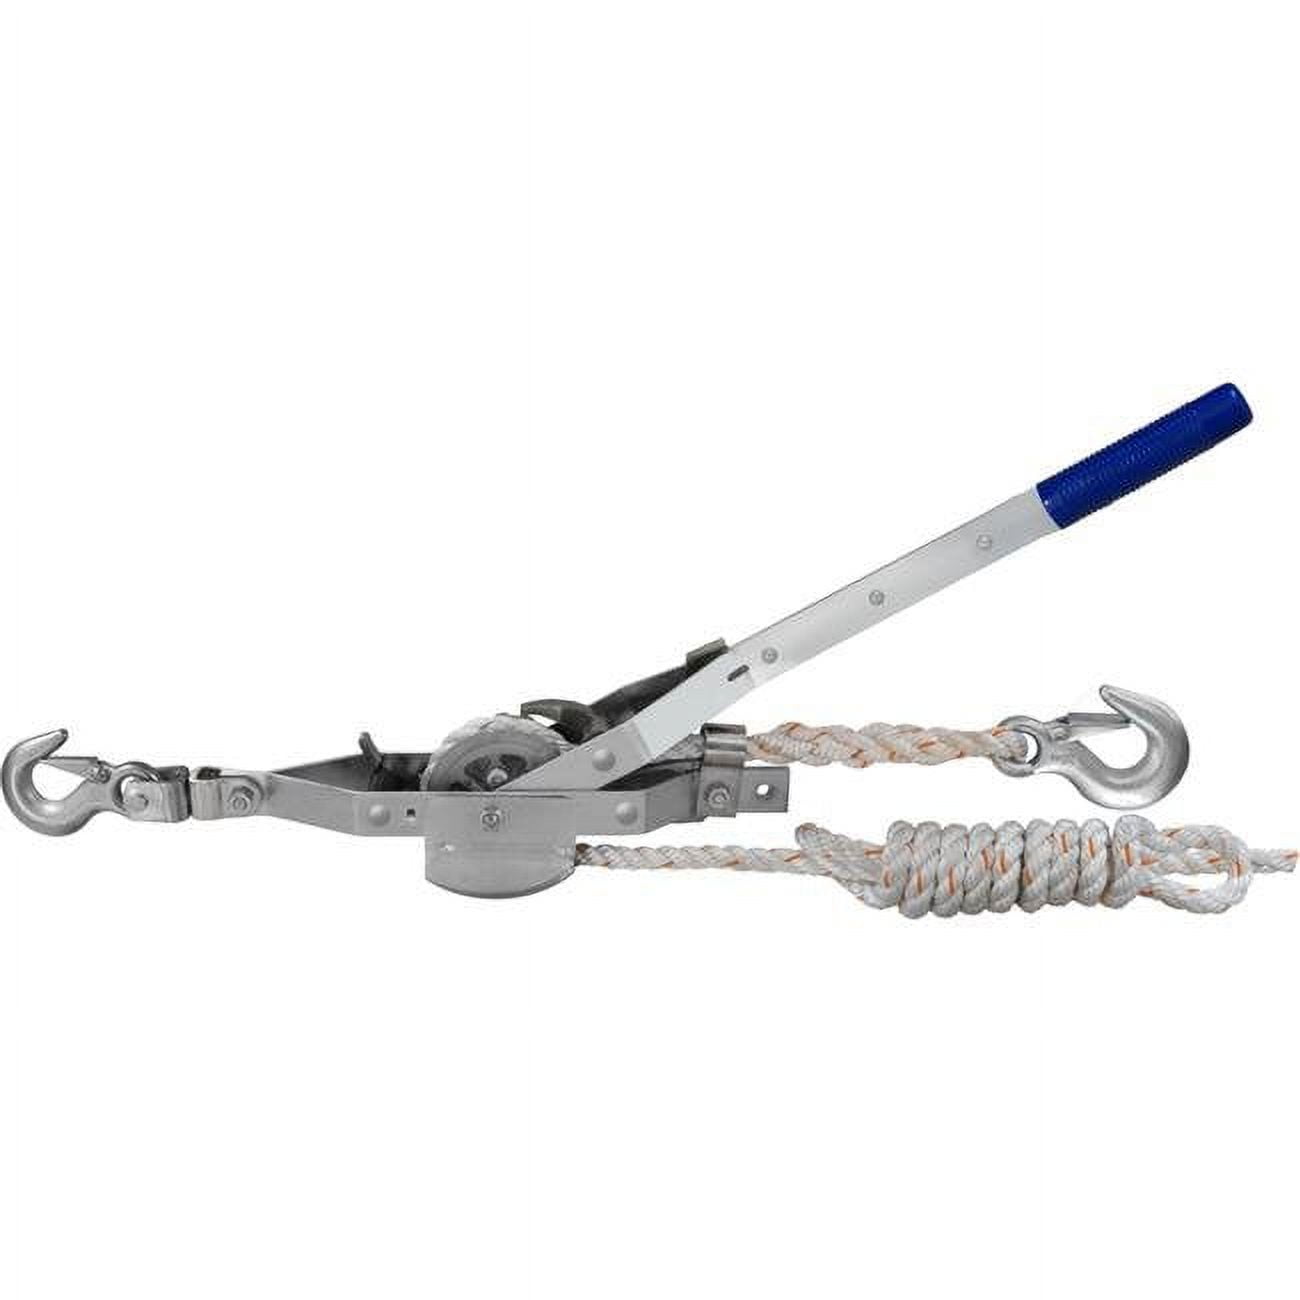 5852389 19.62 In. 1500 Ton Rope Puller